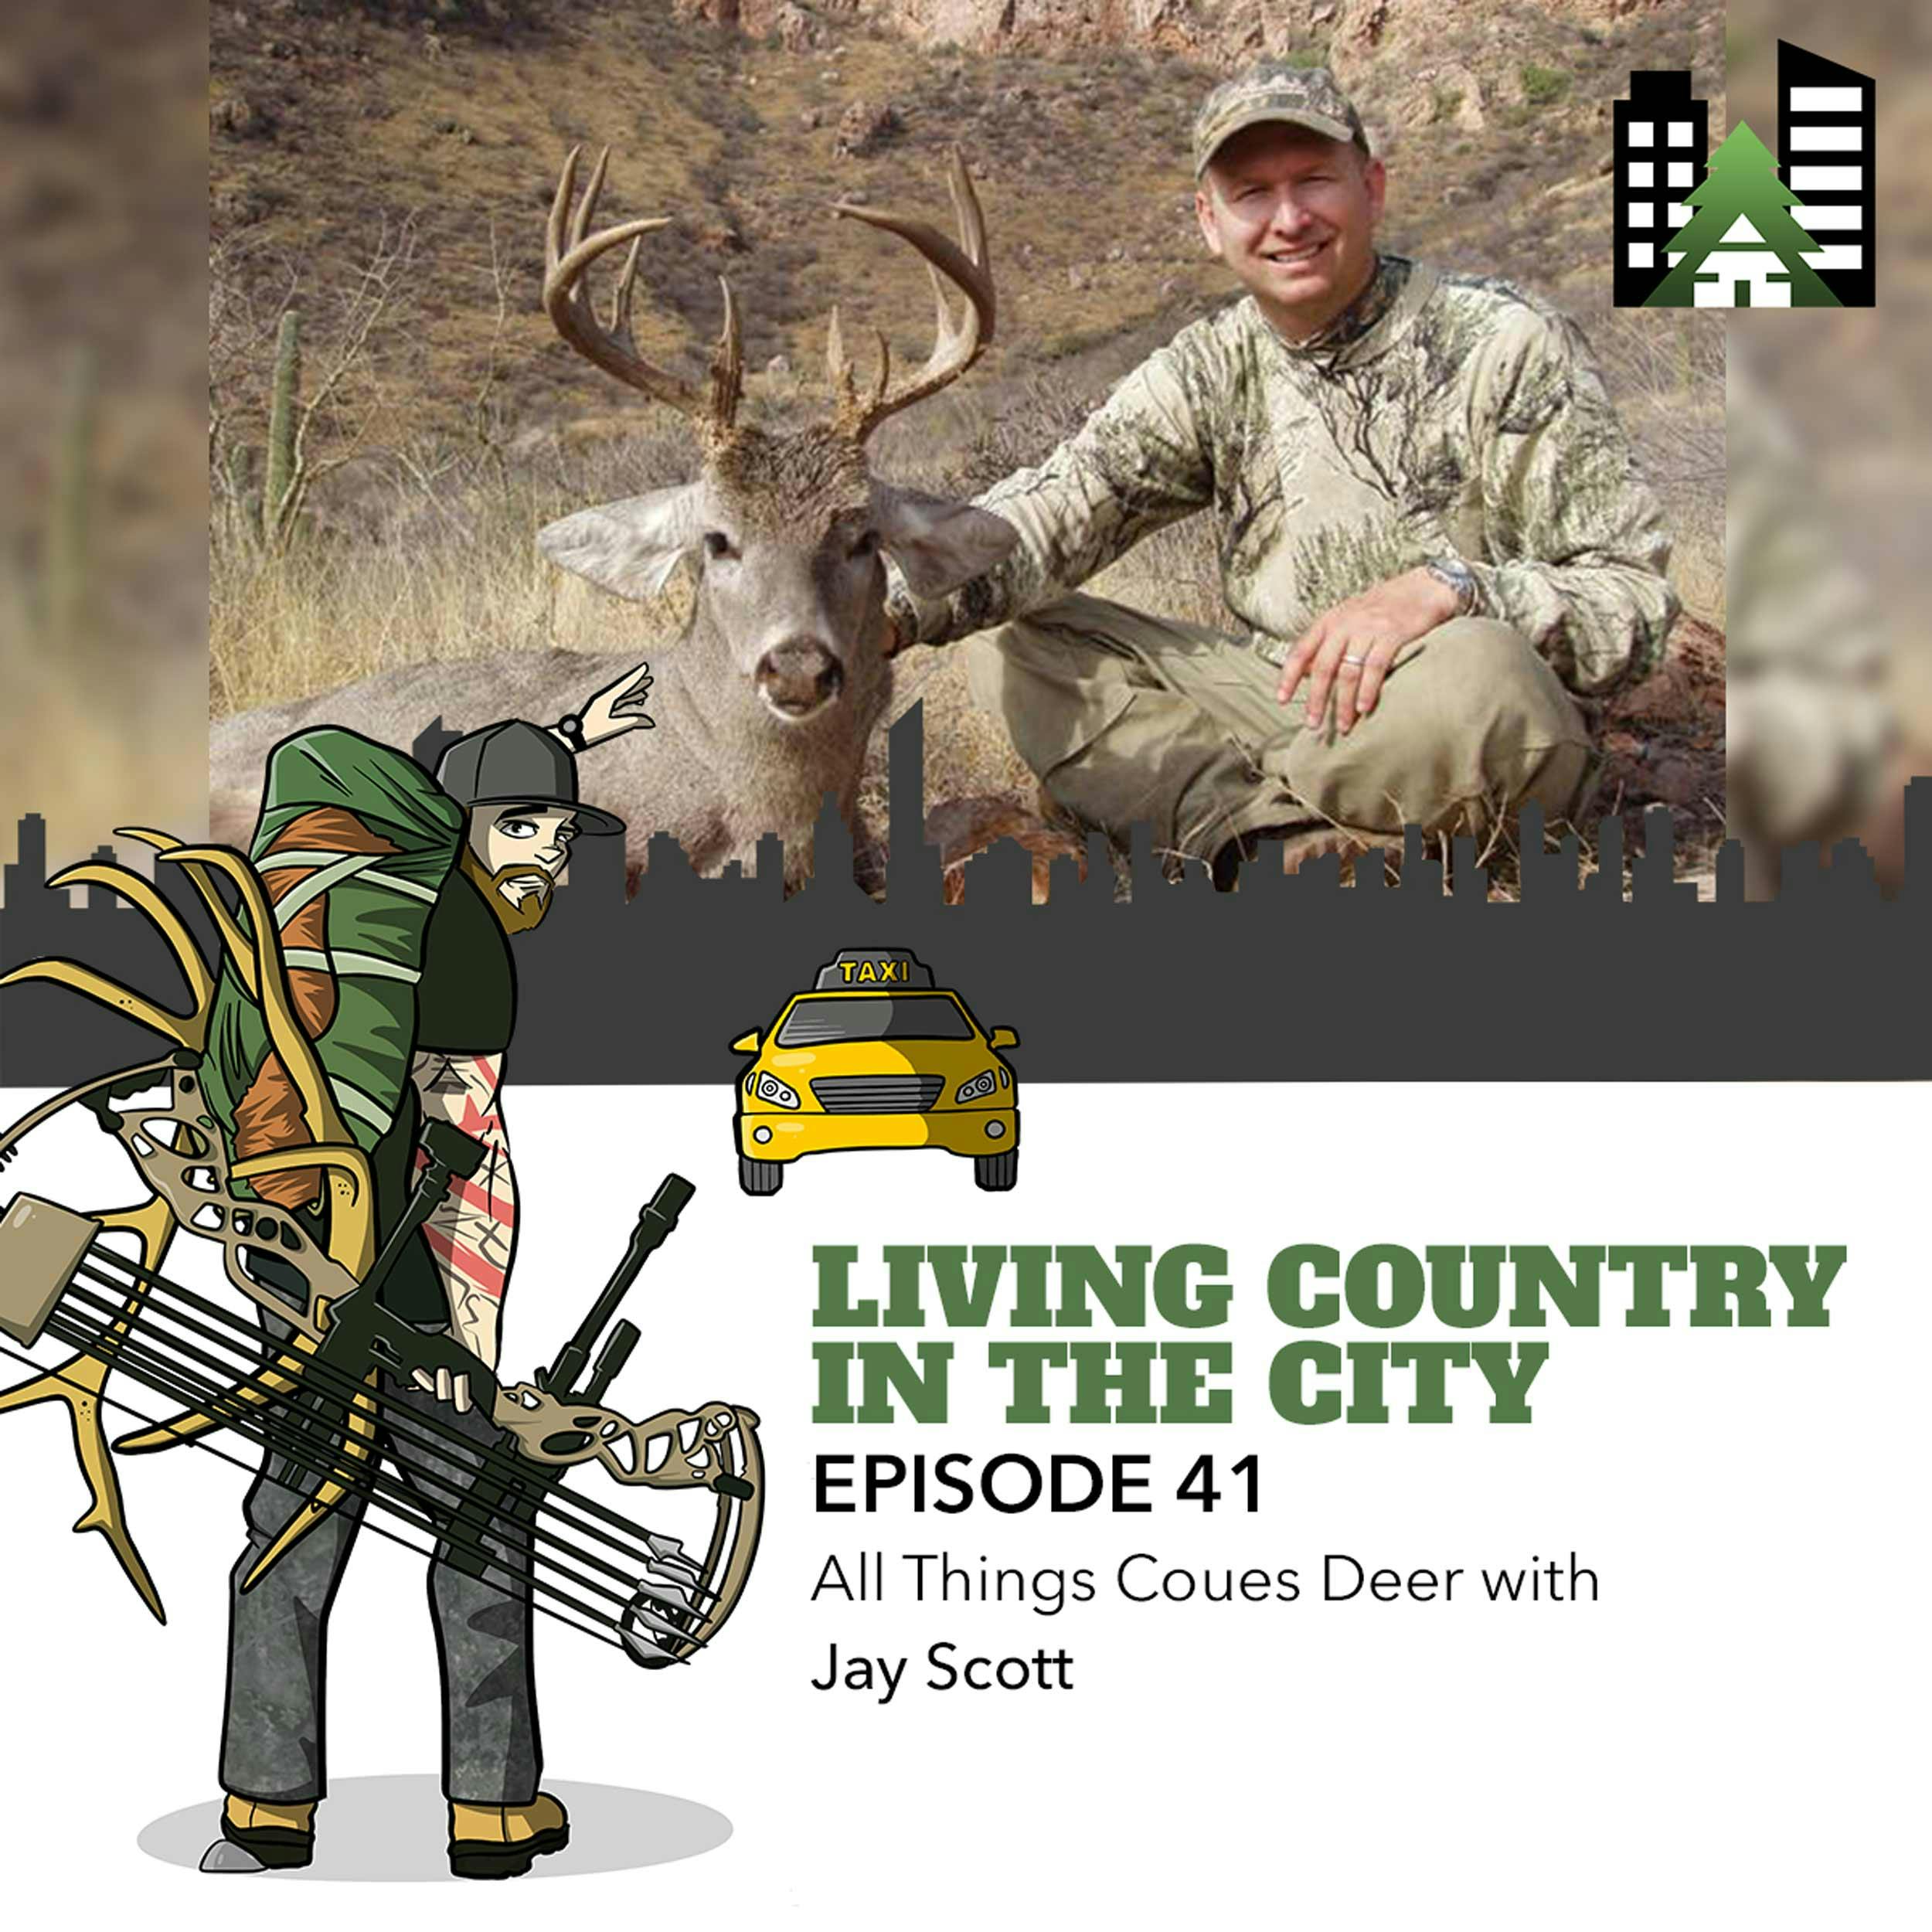 Ep 41 - All Things Coues Deer with Jay Scott